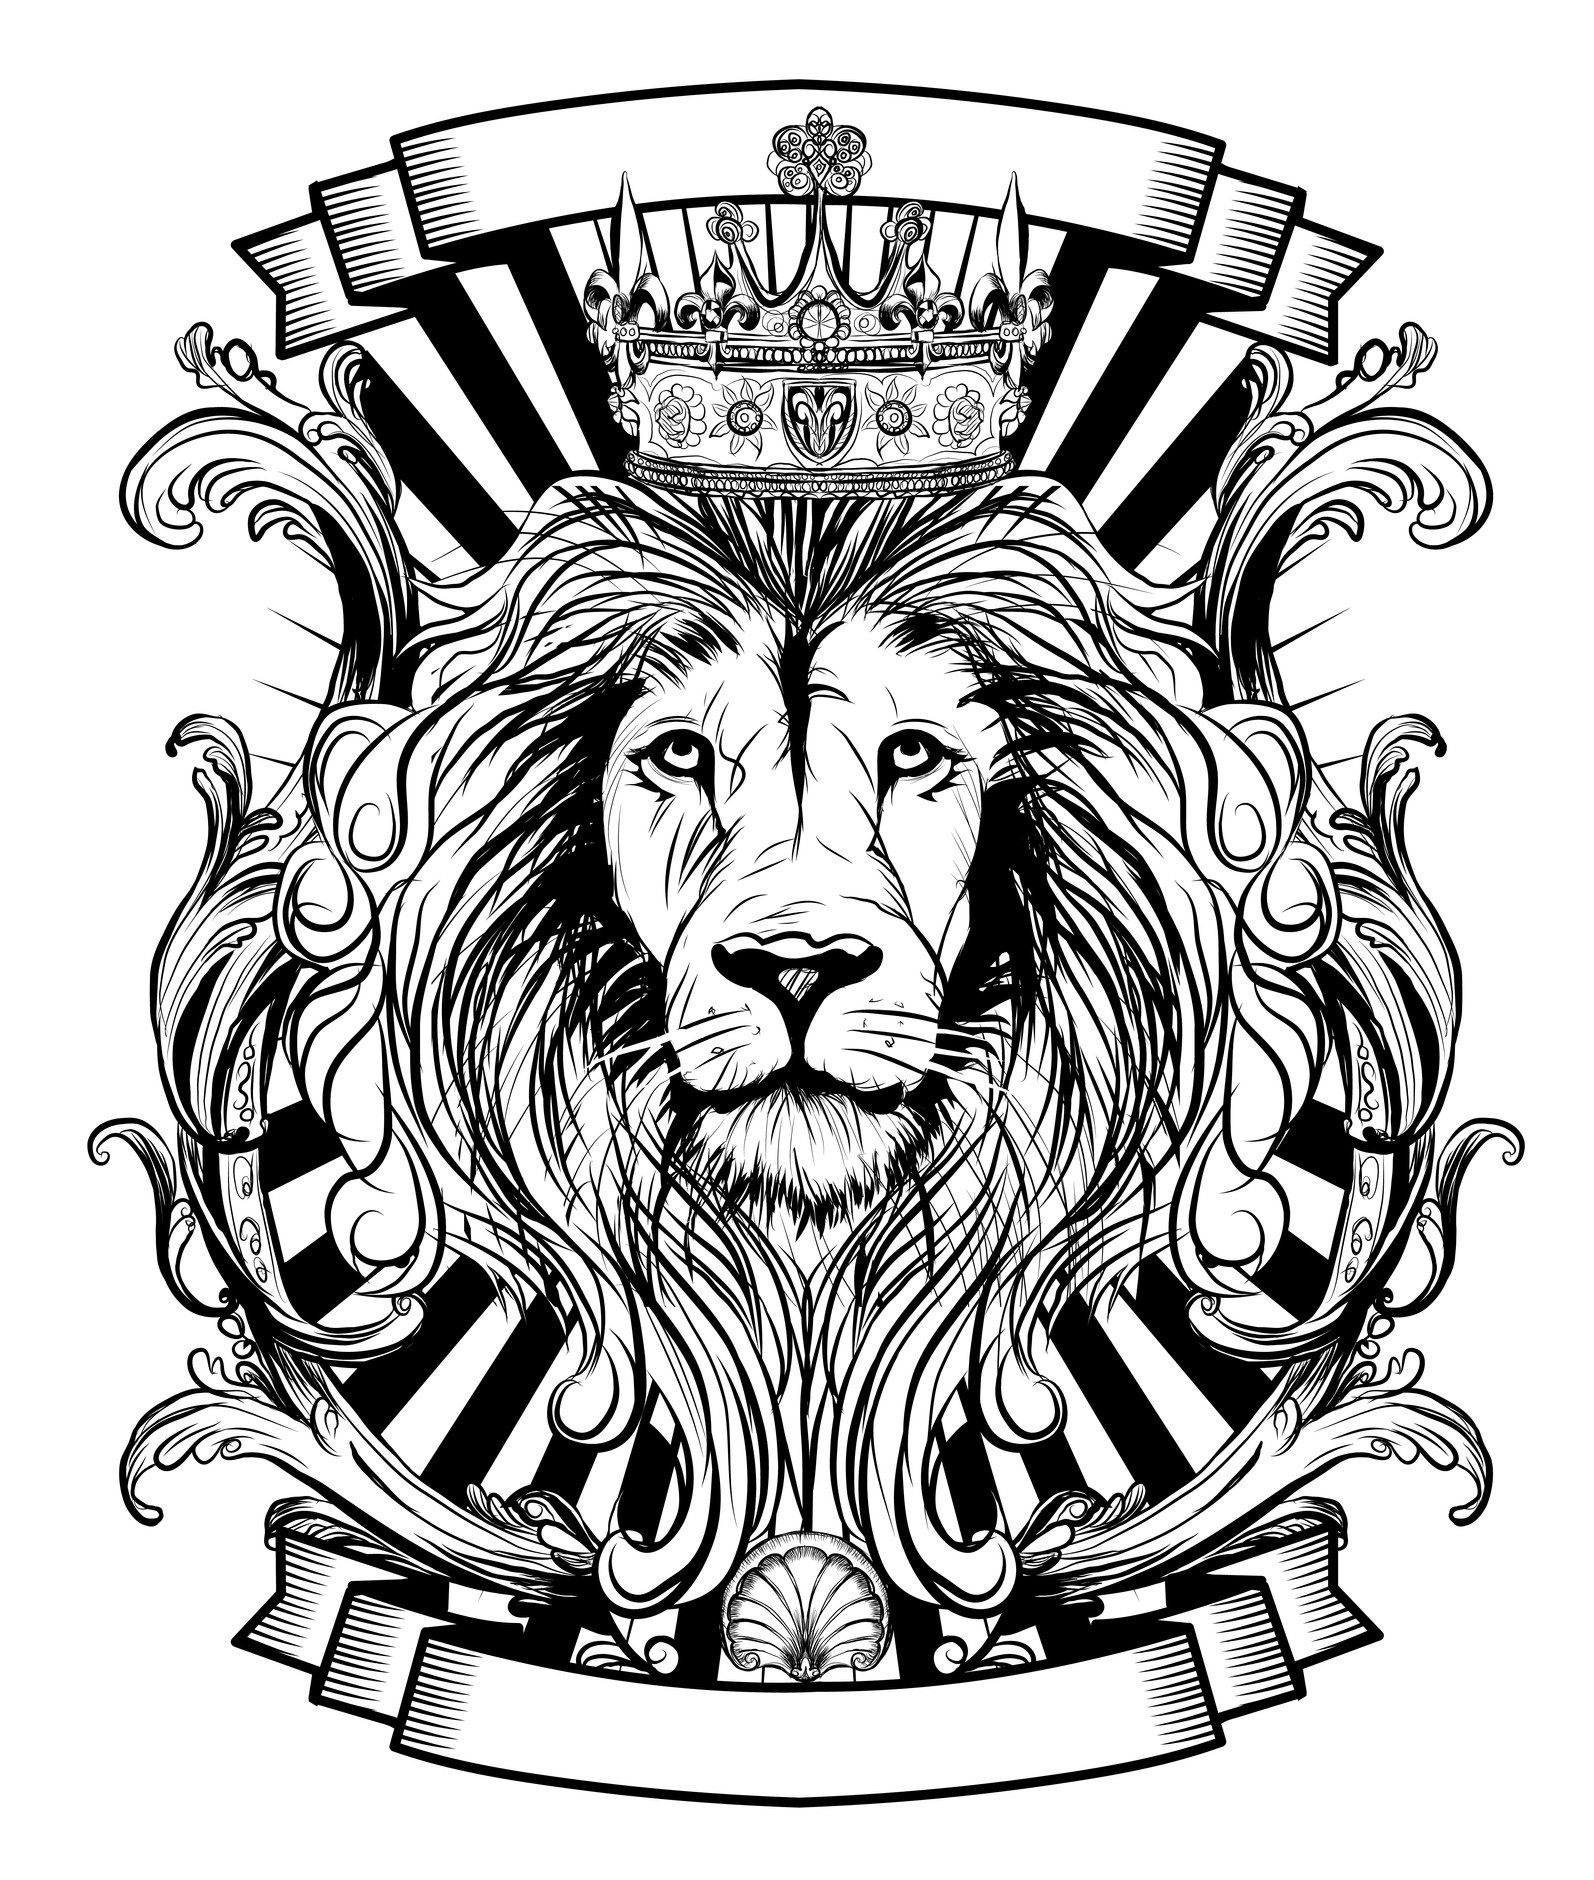 A tattoo design of a lion wearing a crown